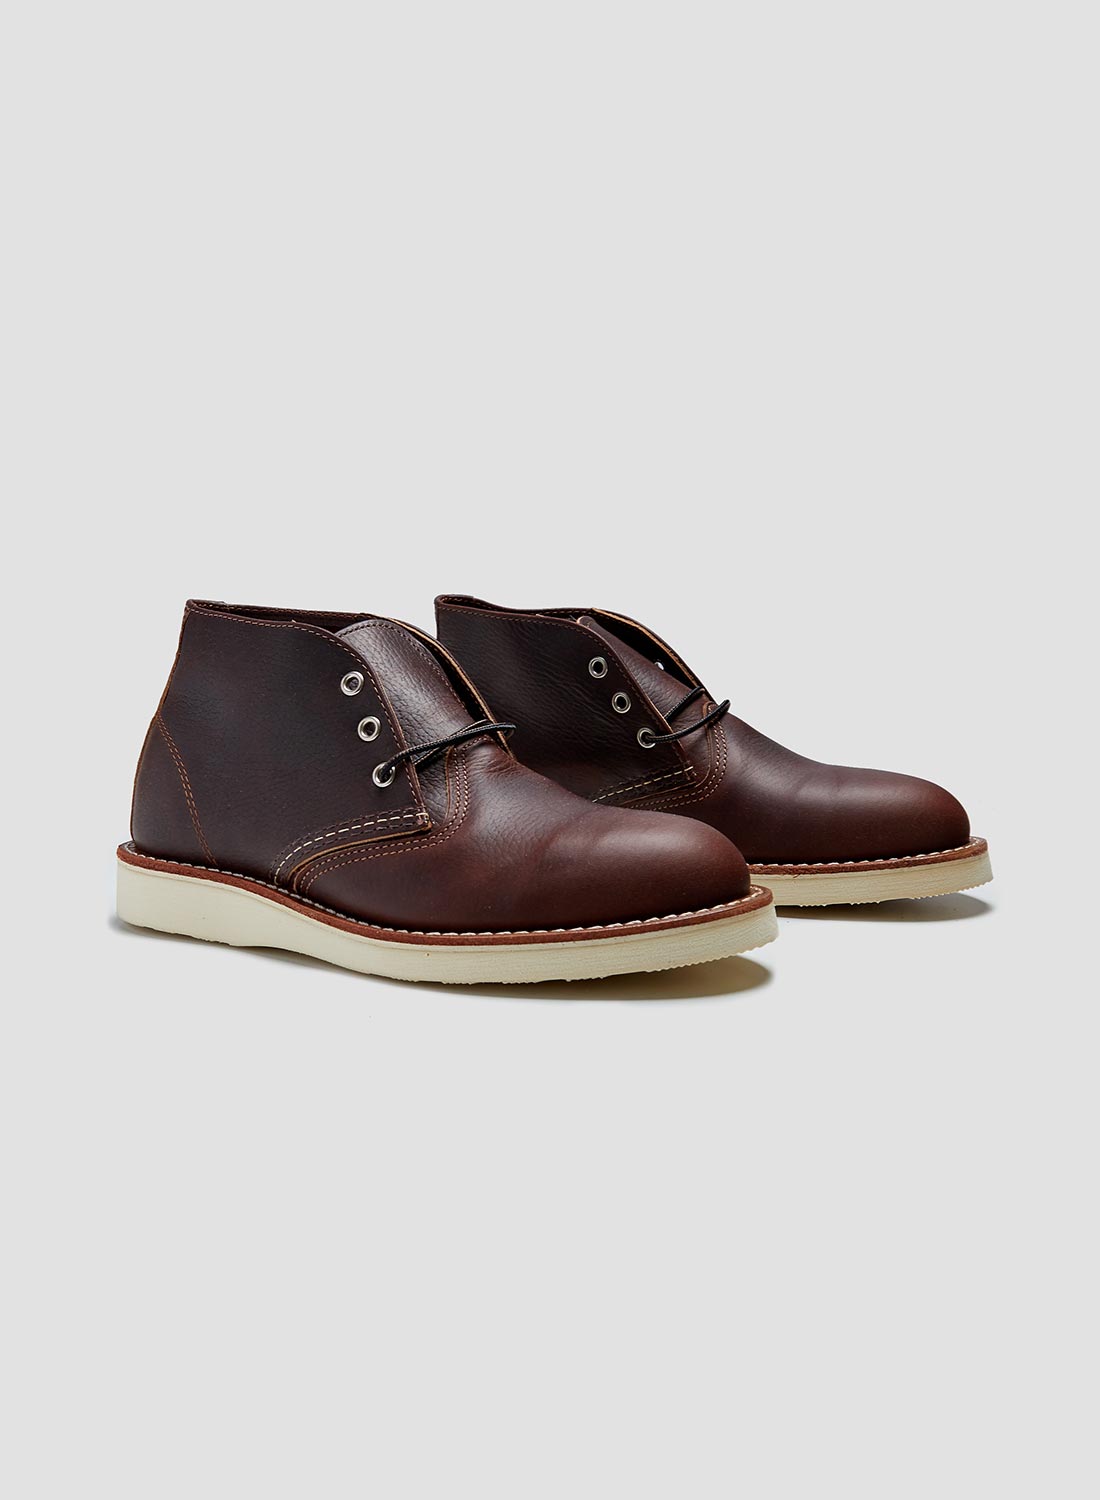 Nigel Cabourn Red Wing 3141 Chukka Boot Briar Oil Slick